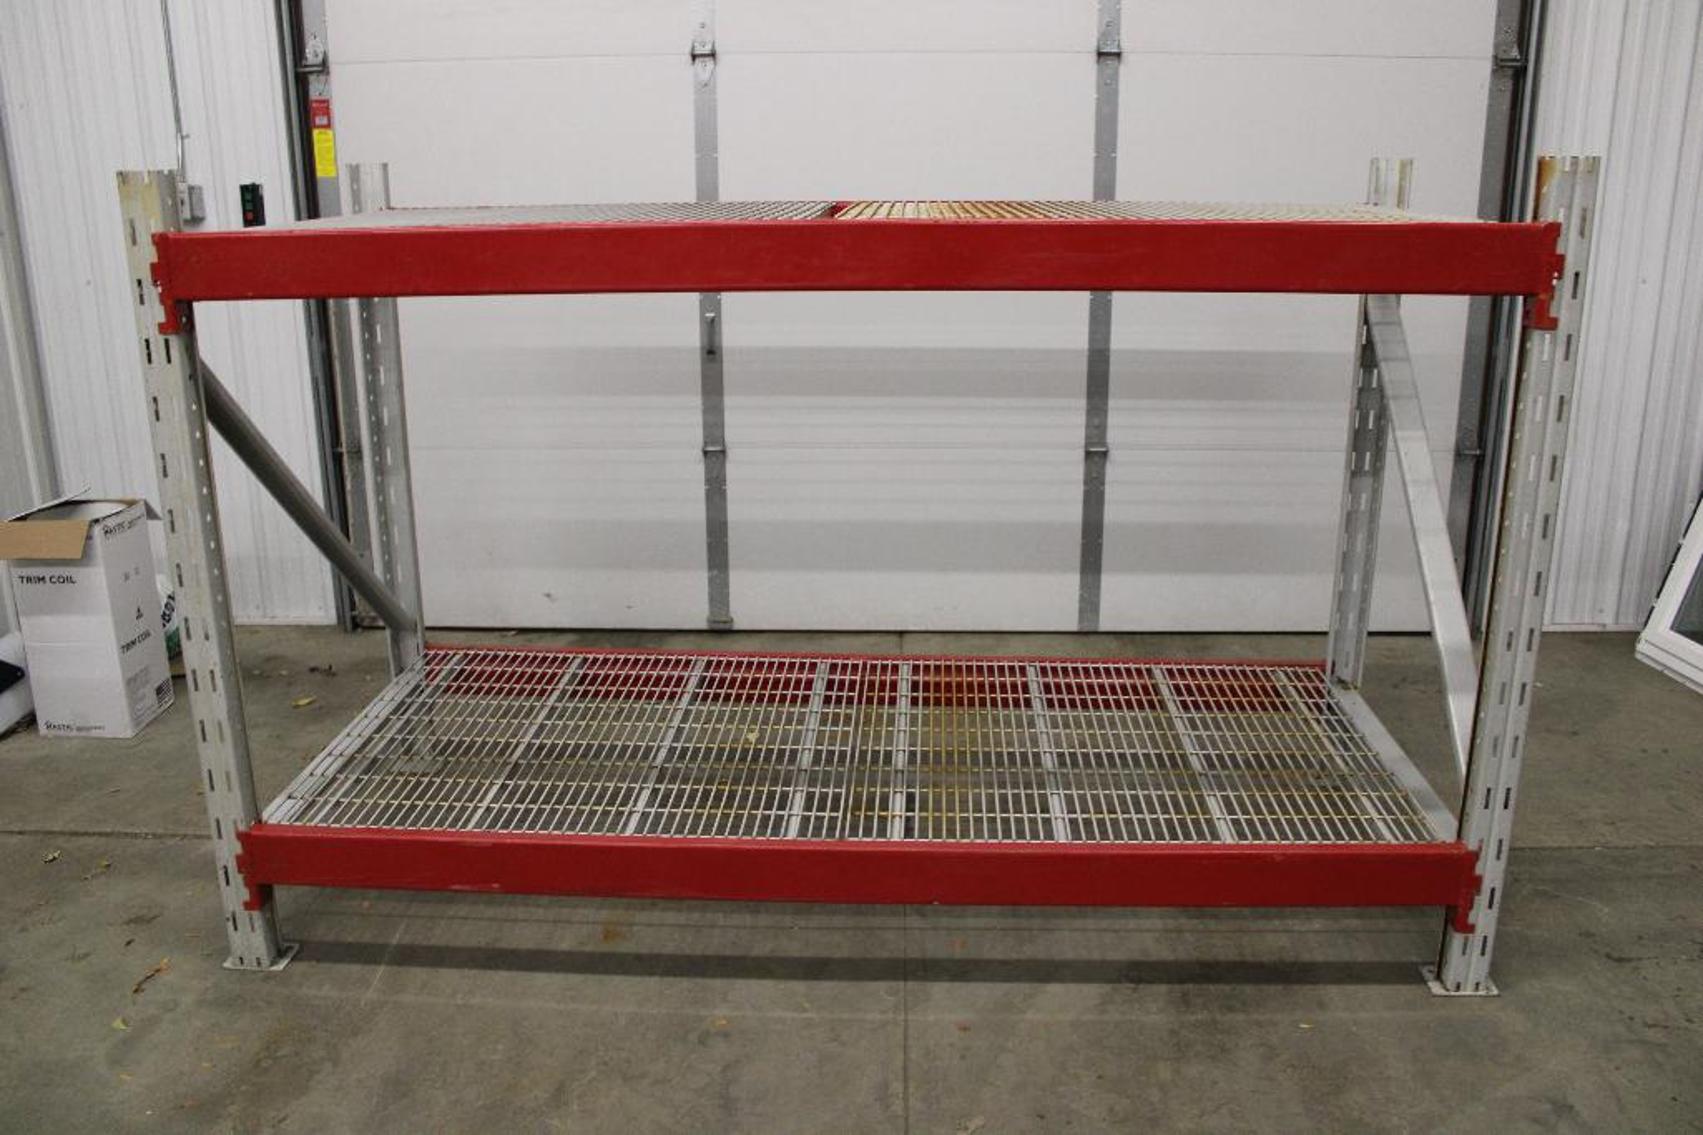 West Fargo Pallet Racking, Vehicles, Furniture, and Consignment